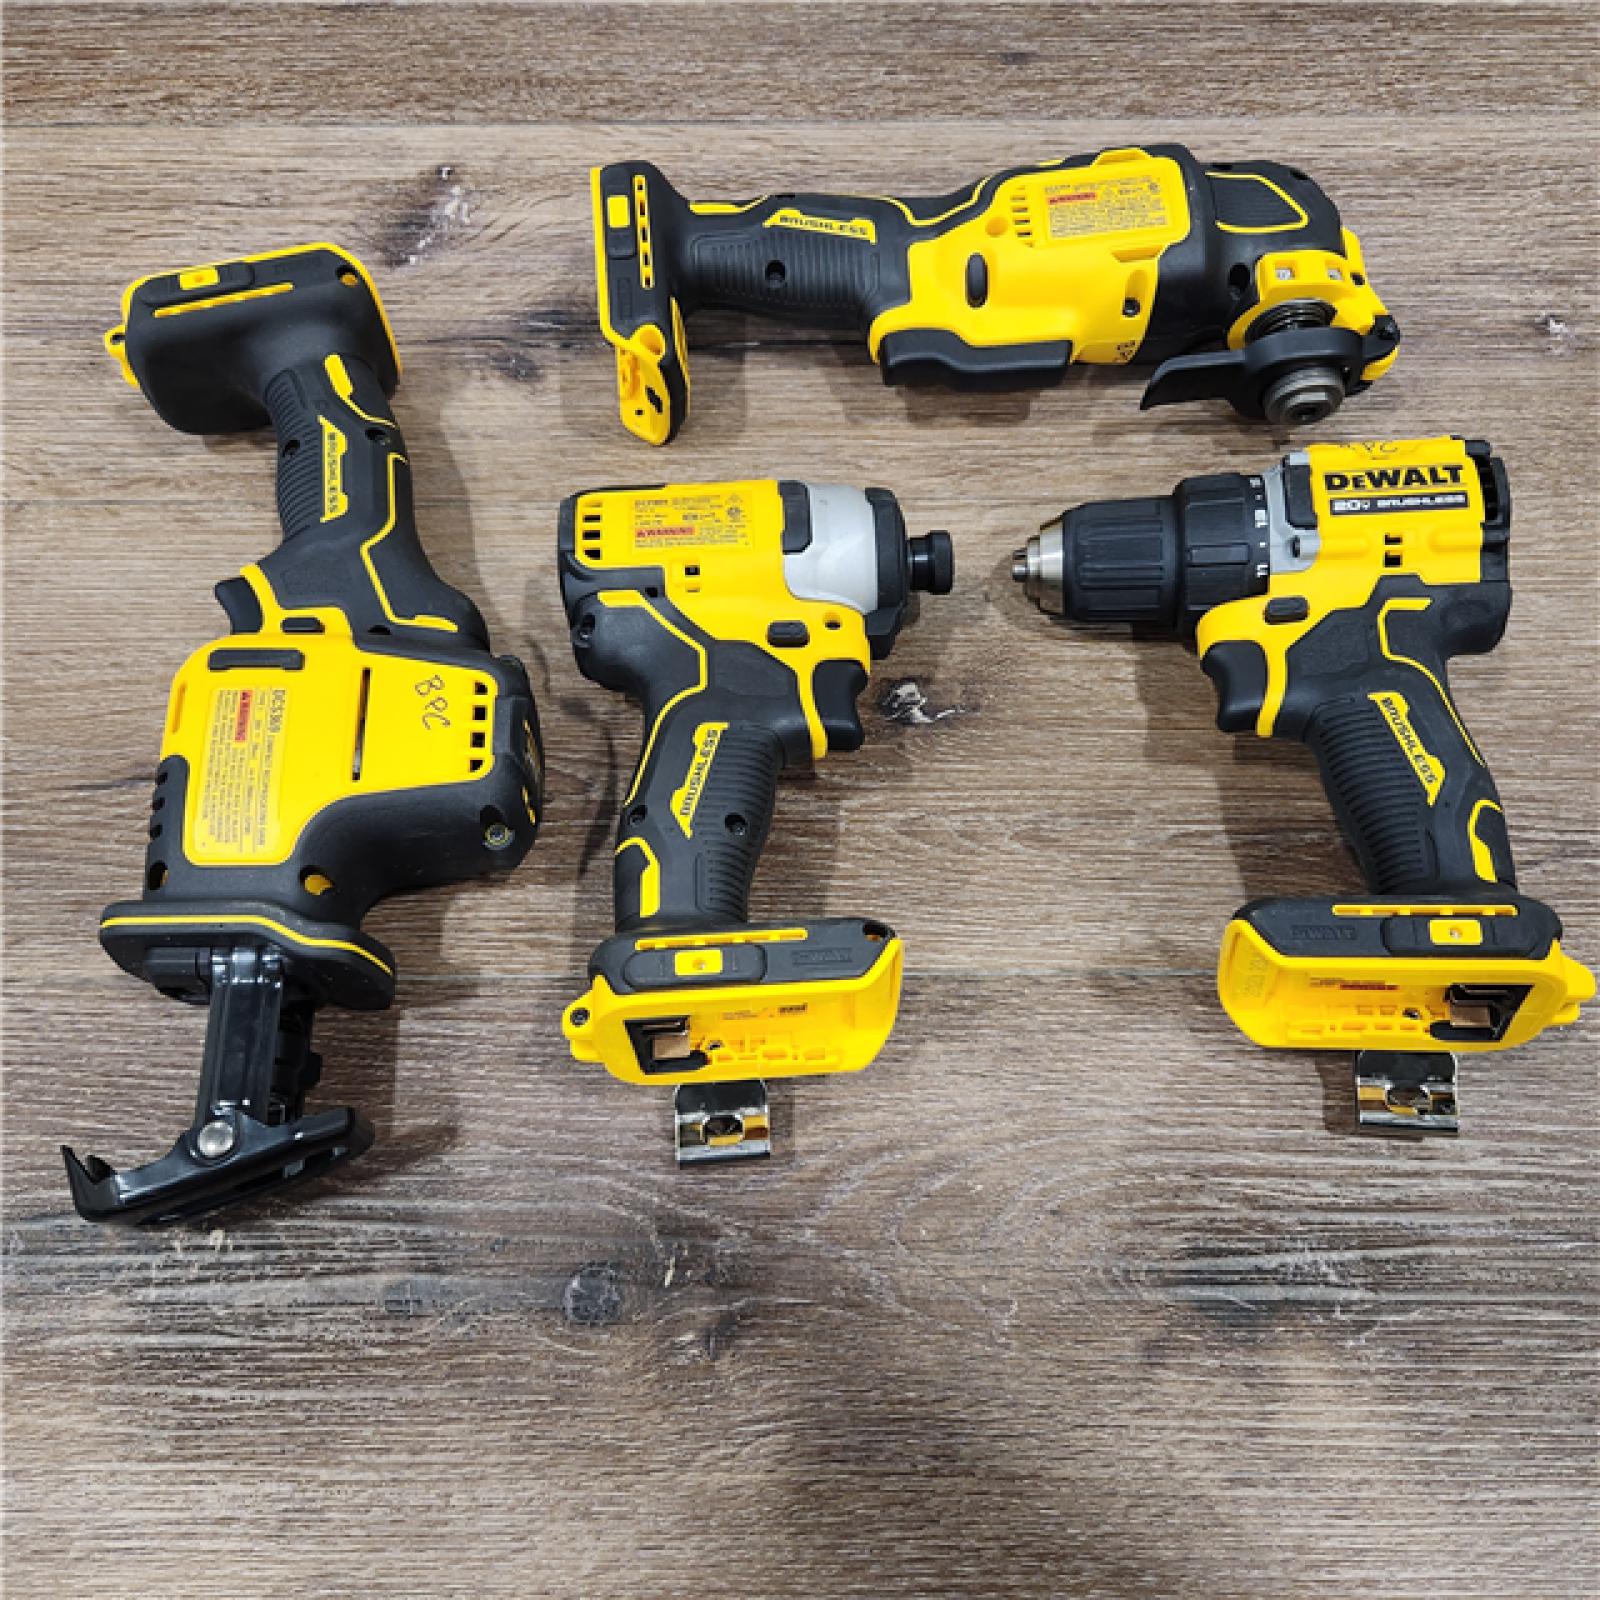 DEWALT ATOMIC 20-Volt Lithium-Ion Cordless Brushless Combo Kit (4-Tool)  Charger and Bag